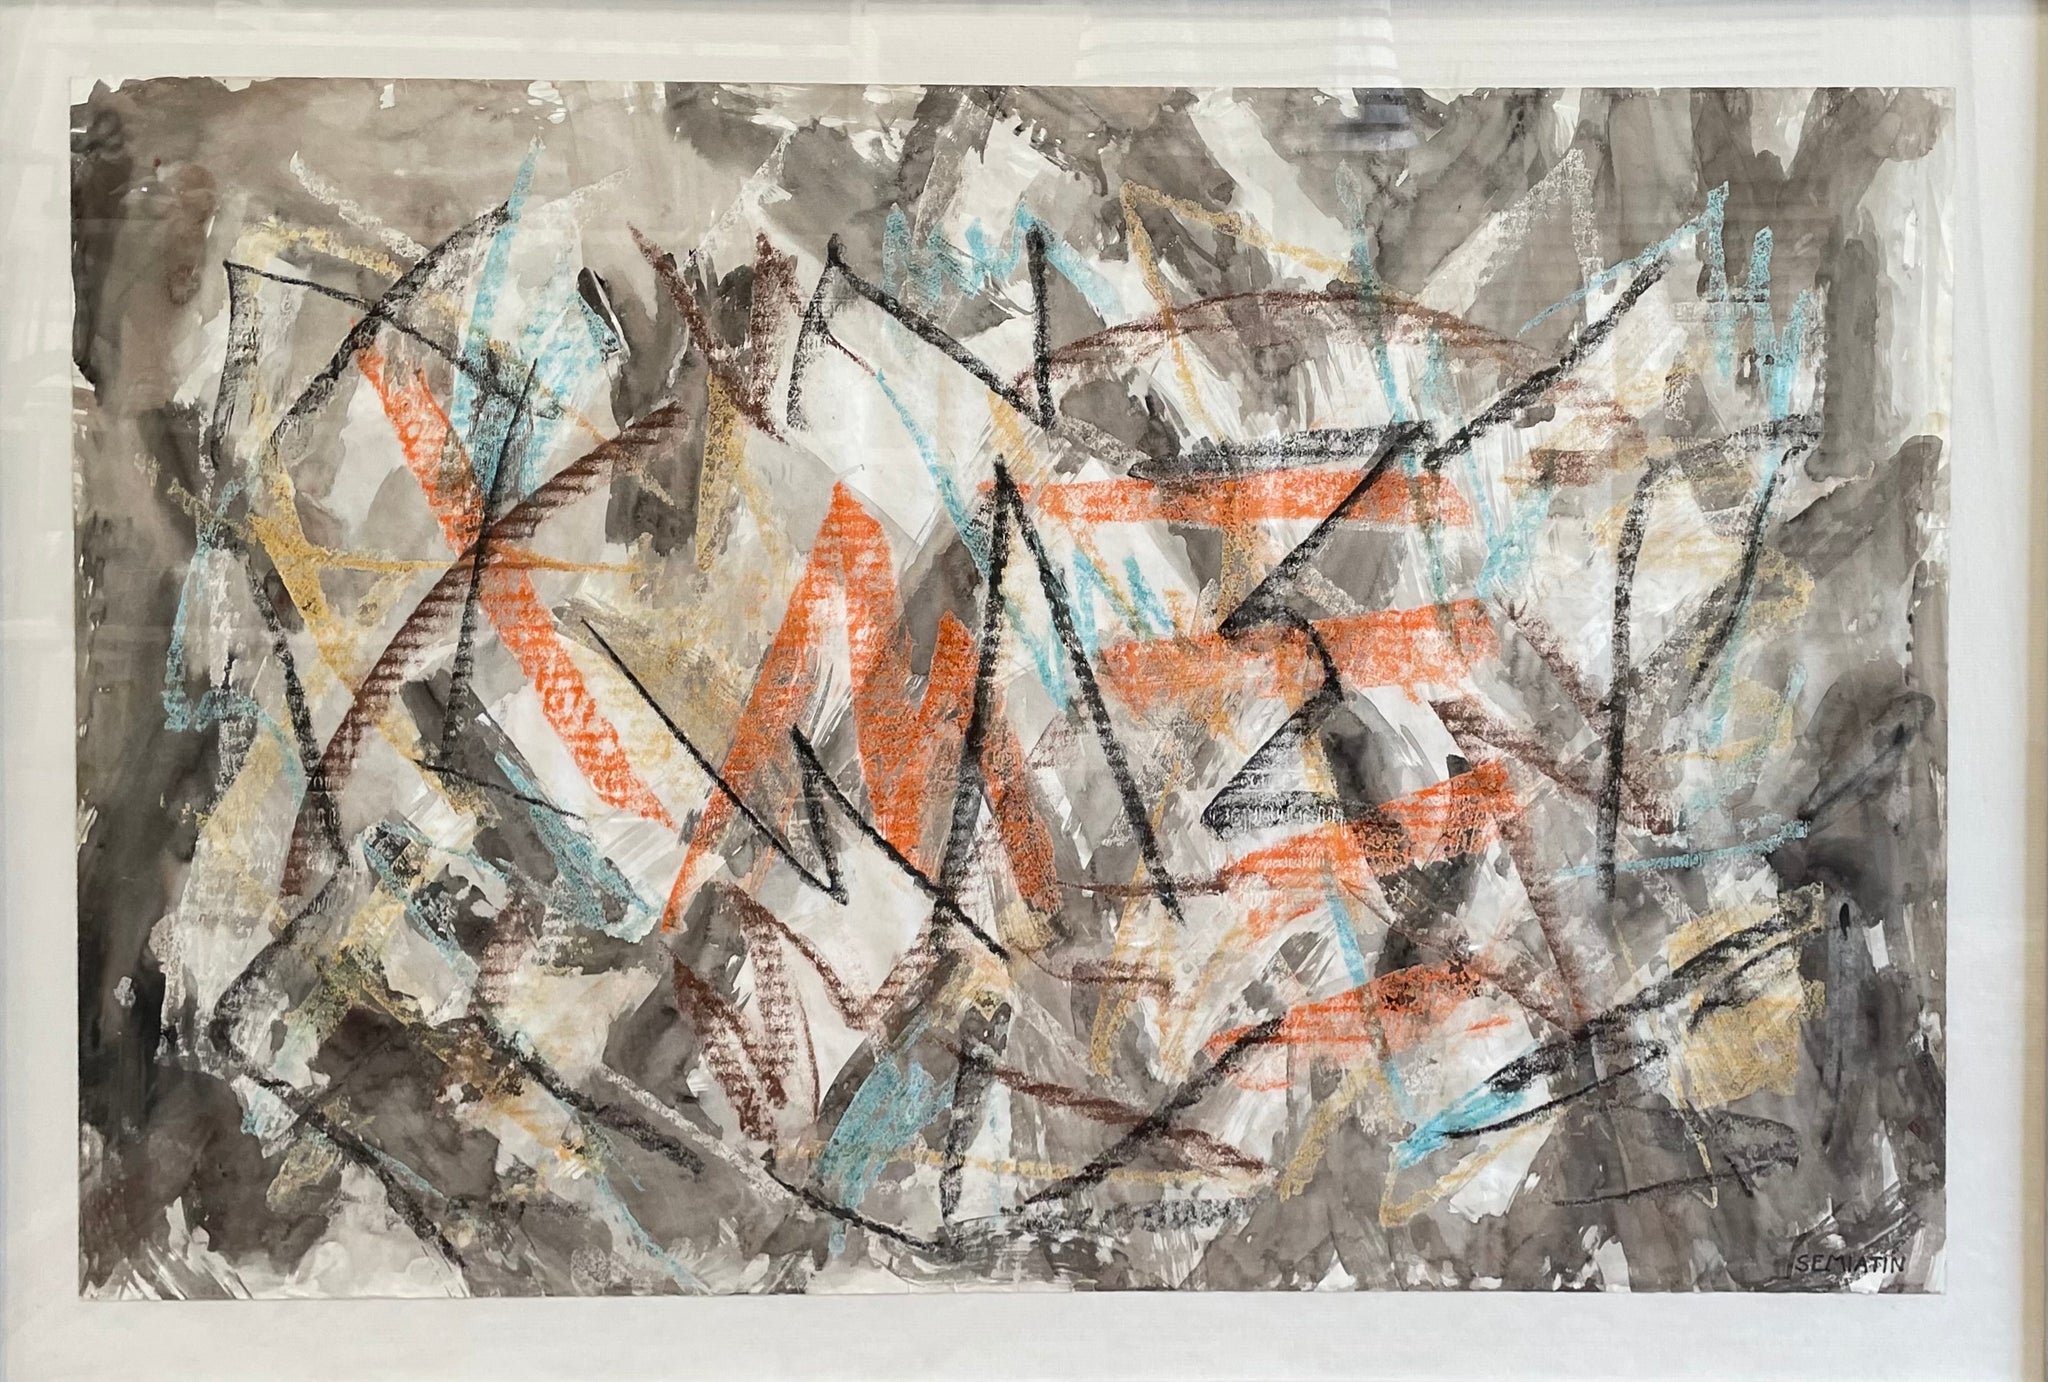 Abstract Watercolor Painting by Jacob Semiatin in Grey Frame. Signed by artist.